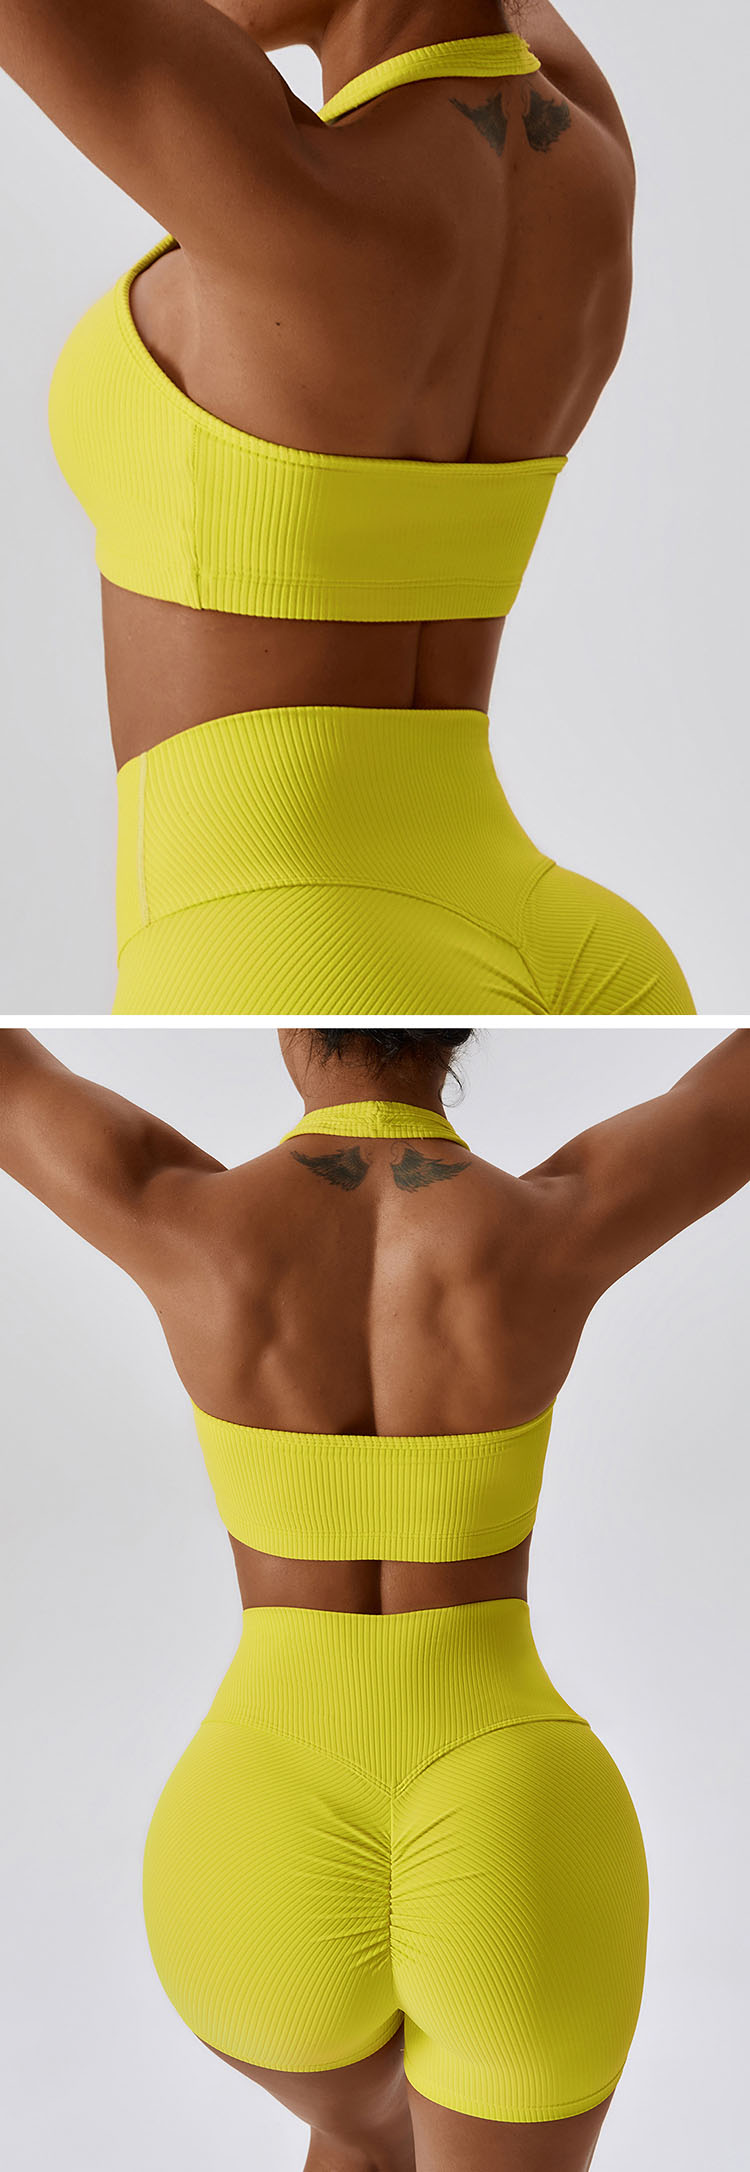 Open-back design is adopted to show sexy back and help sweat during exercise